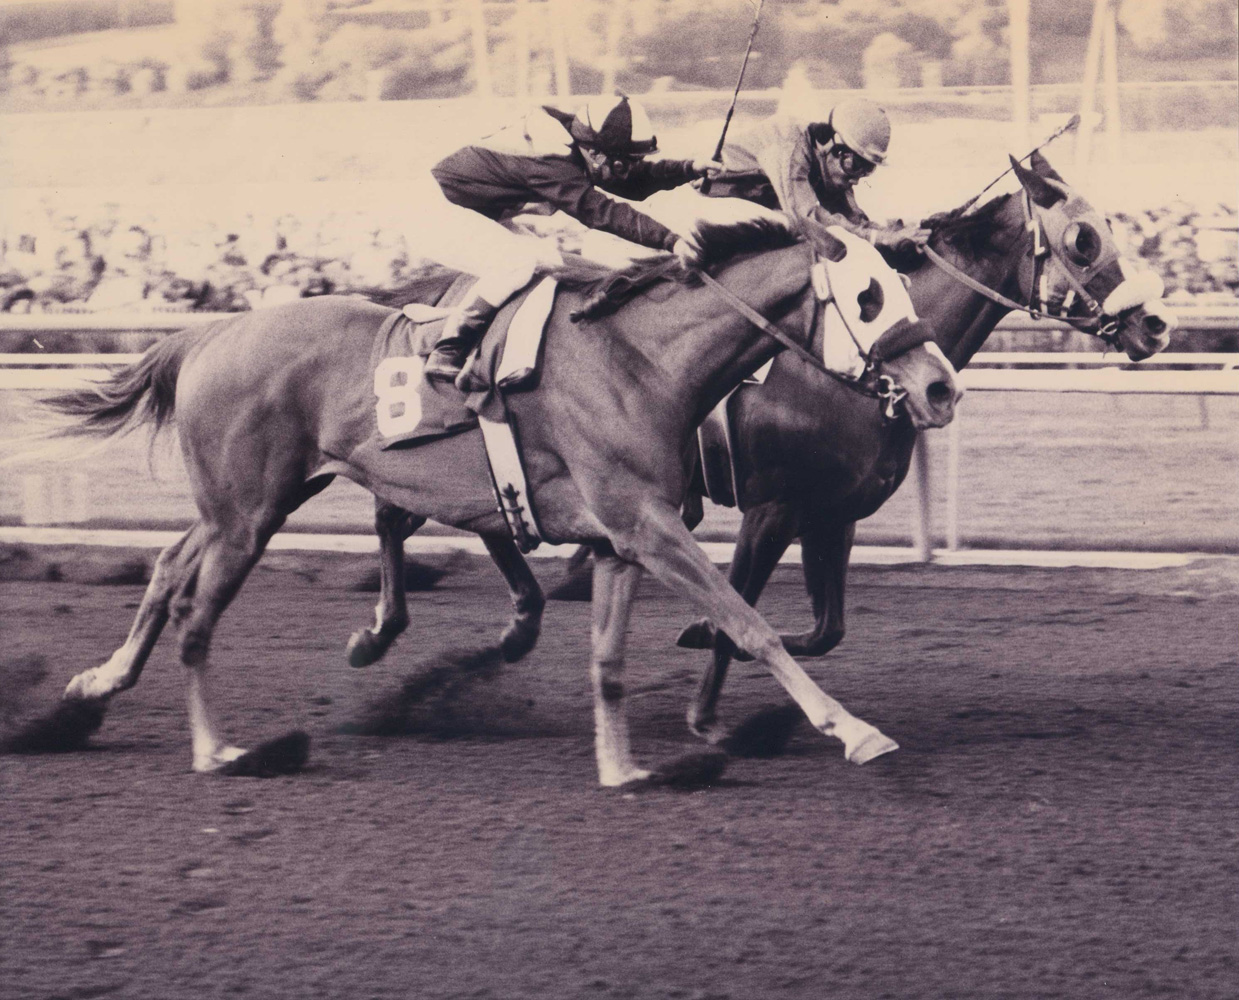 Chris Evert (on the inside with Jorge Velasquez up) winning the 1975 La Canada at Santa Anita by a nose (Santa Anita Photo/Museum Collection)